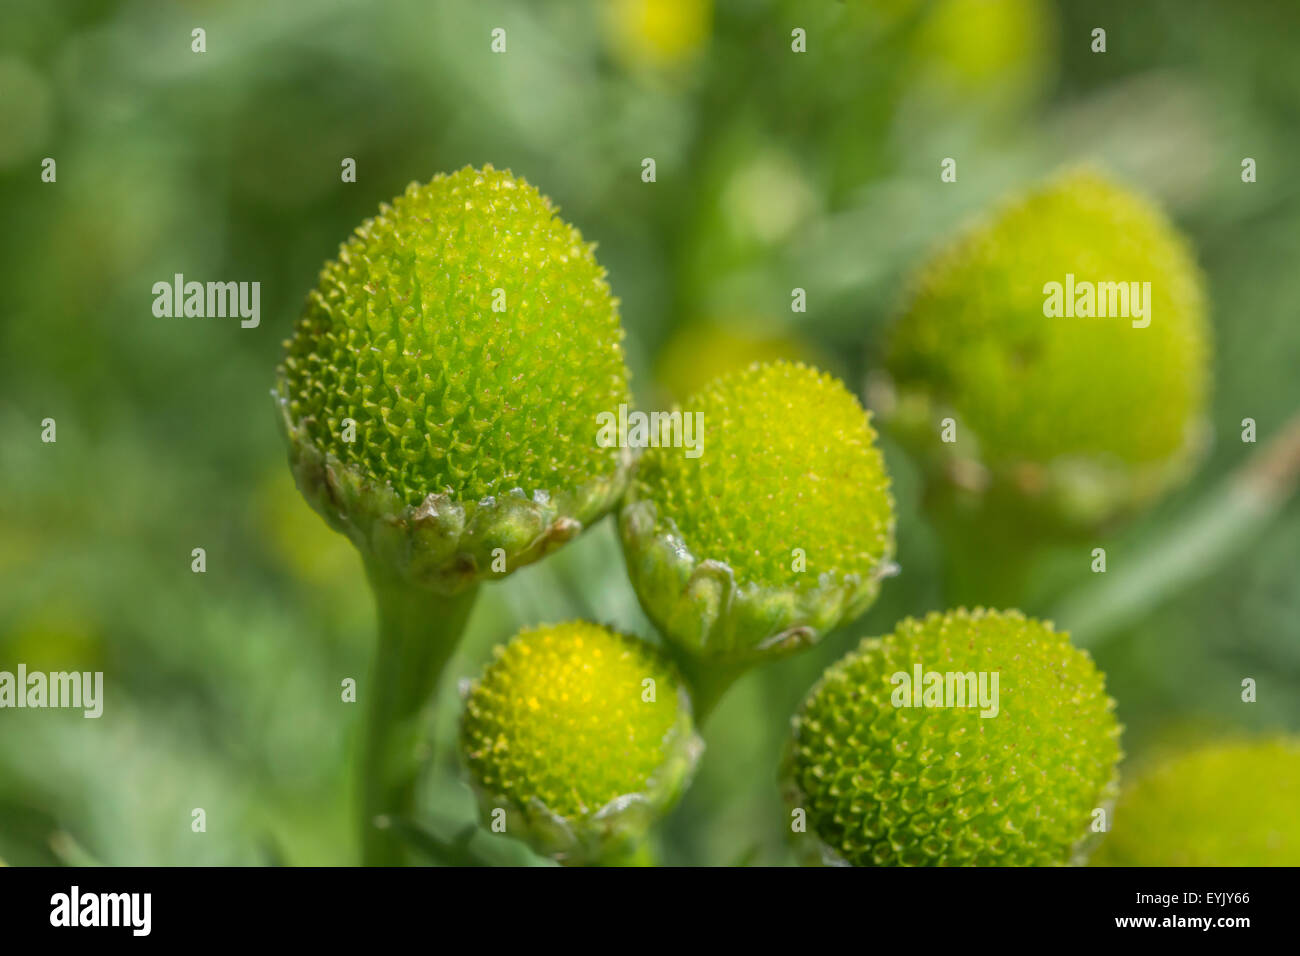 Pineapple weed / Matricaria discoidea plant in flower - the yellow ...